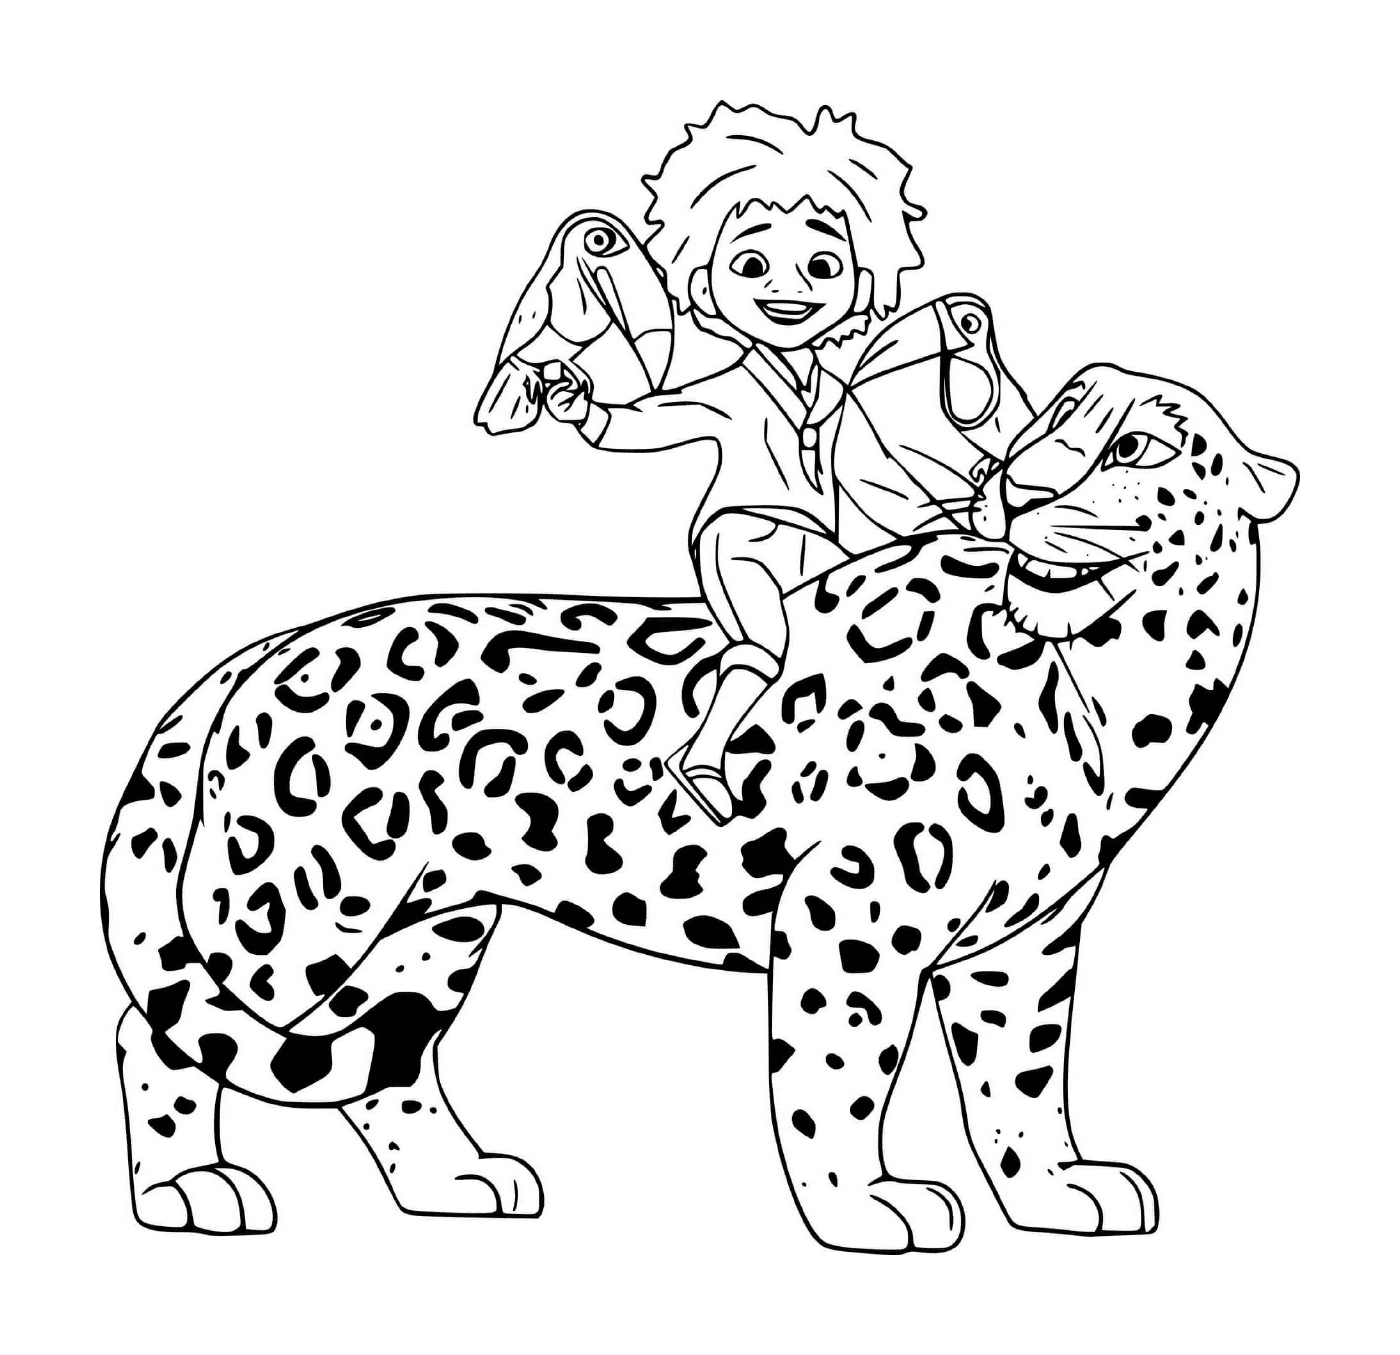  Antonio riding a leopard with jaguars and toucans 